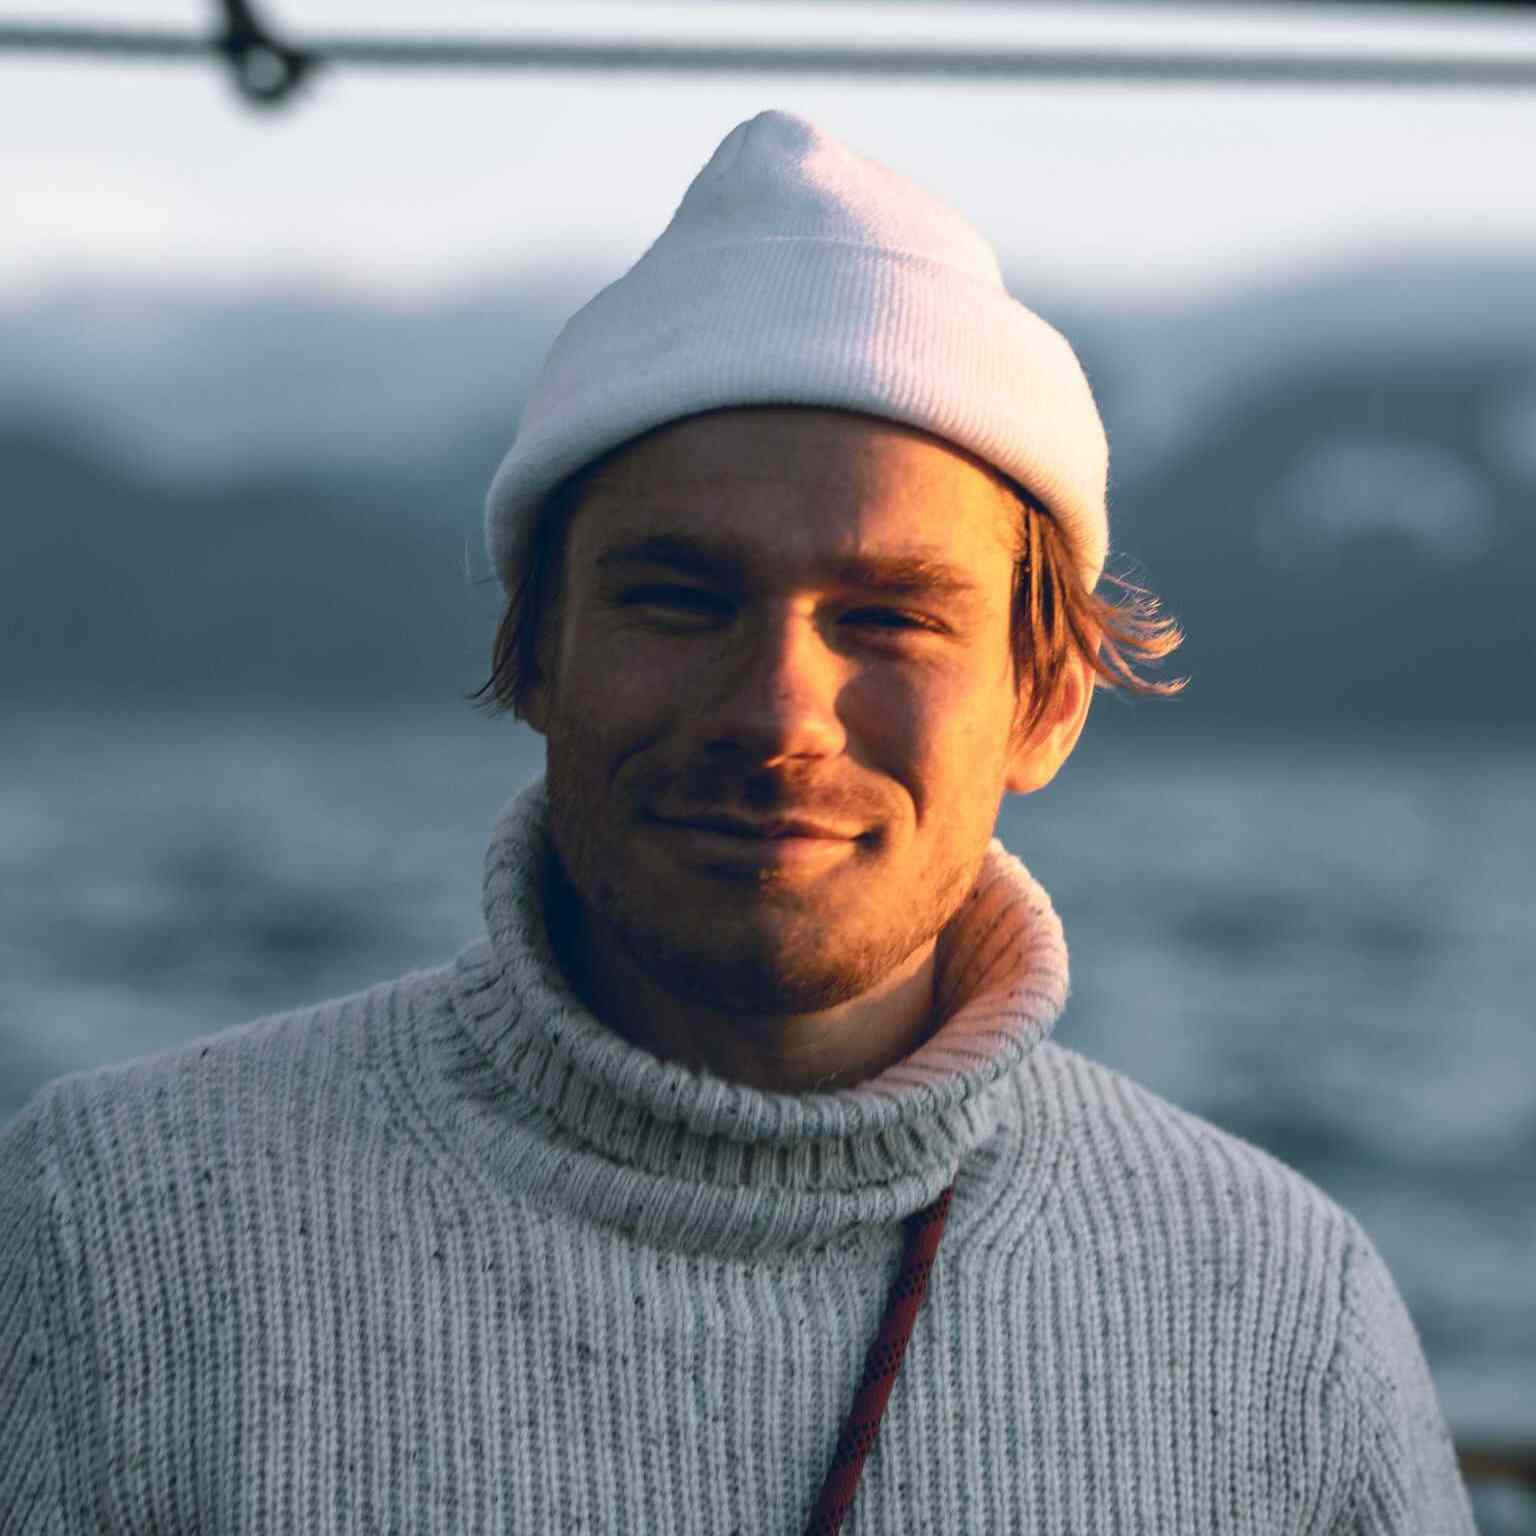 A man who is wearing an Icelandic sweater and hat